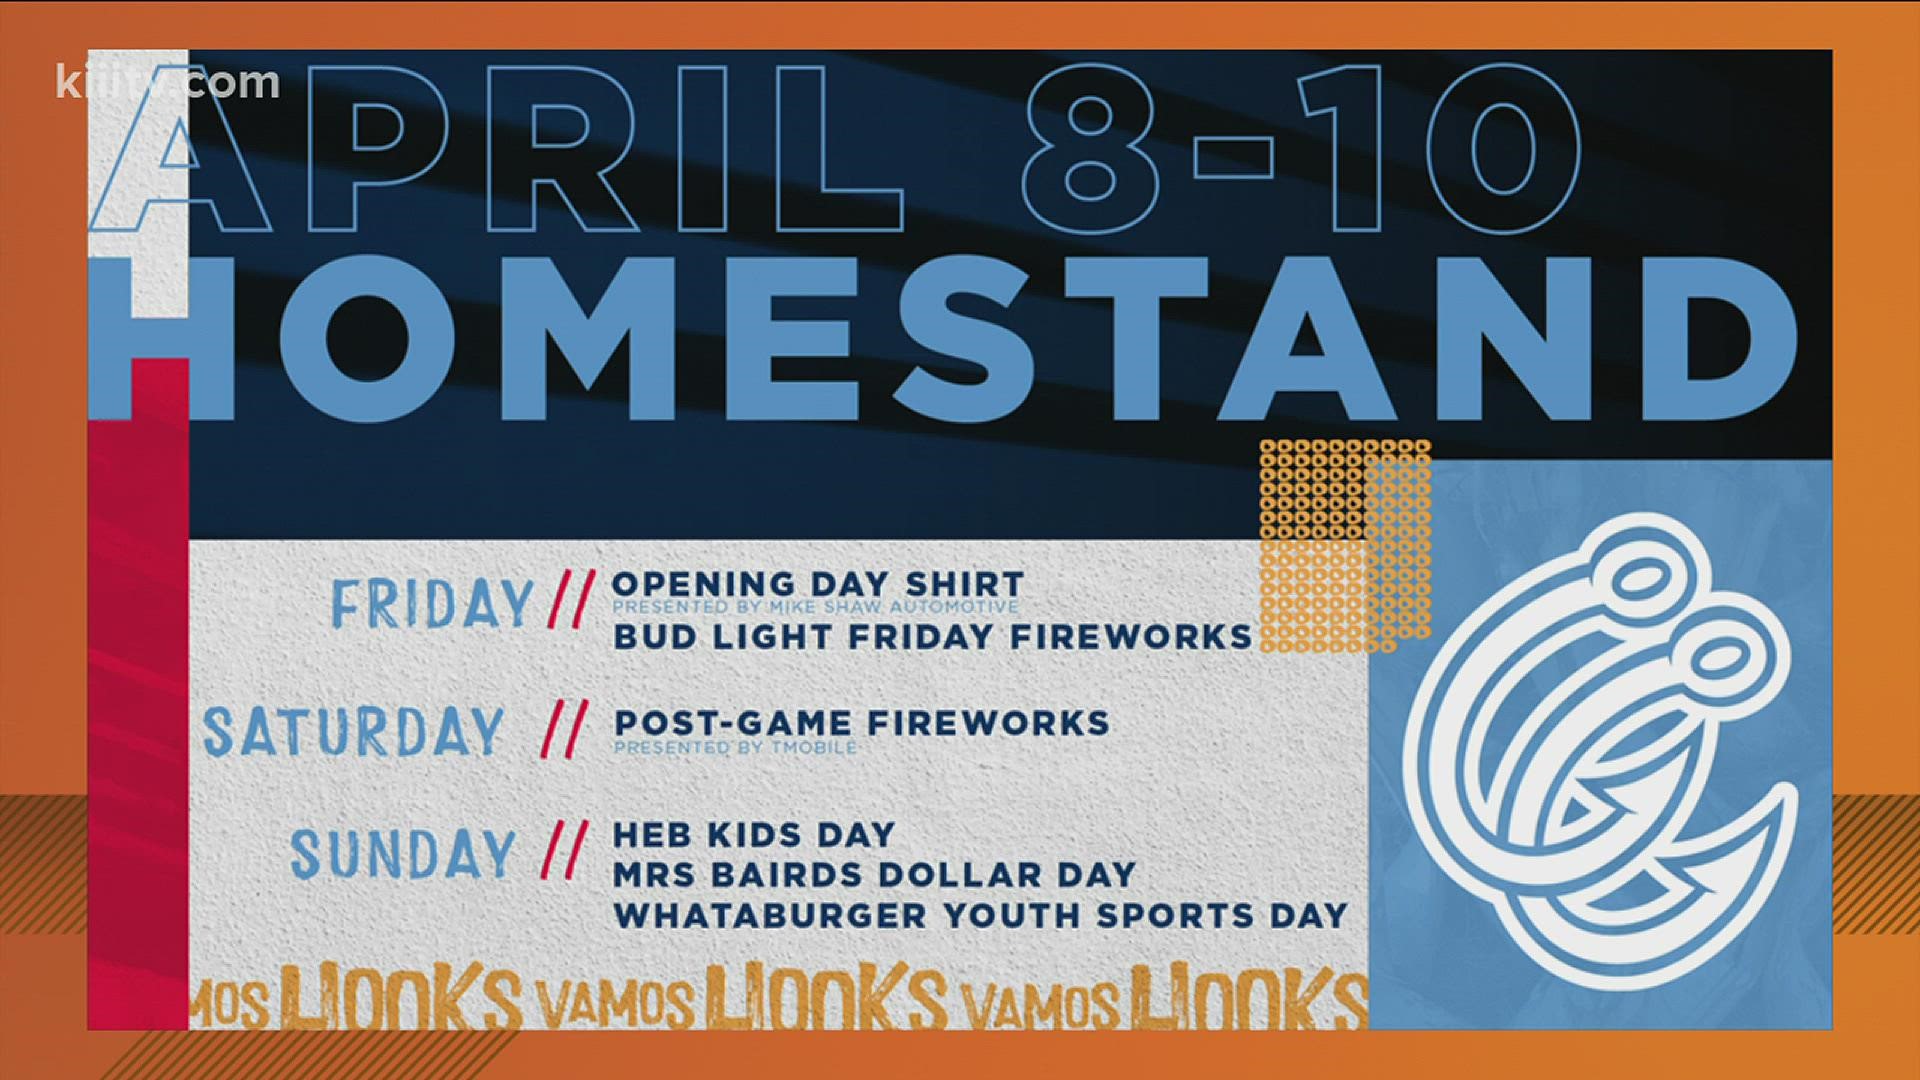 The Corpus Christi Hooks host their first game of the season at Whataburger Field Friday night! It also happens to be Channel 3 night.